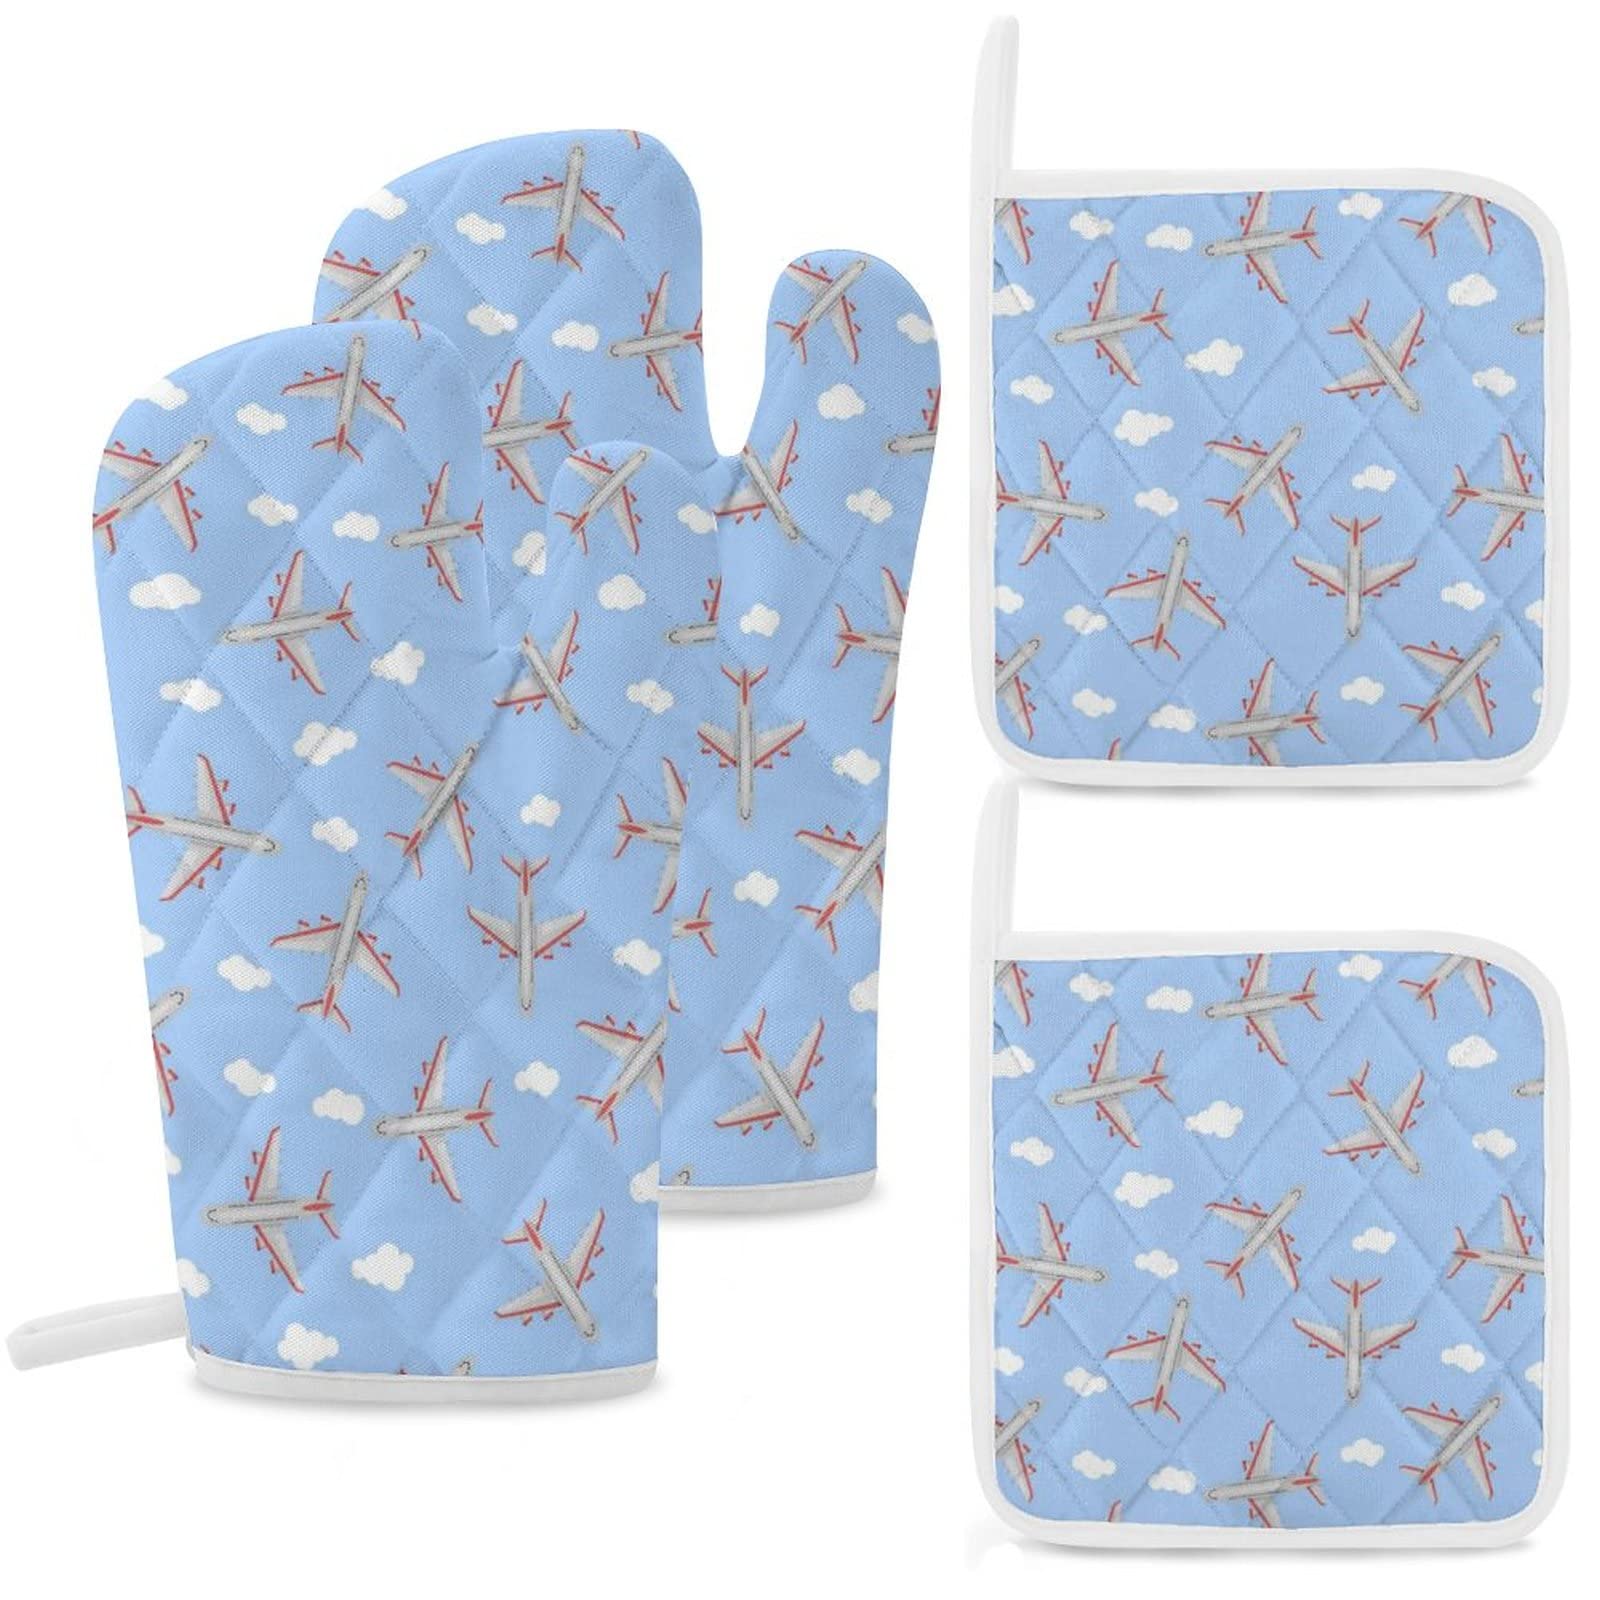 Airplane in The Sky Print Oven Mitts and Pot Holders 4 Piece Set Gloves and Potholders for Kitchen Cooking